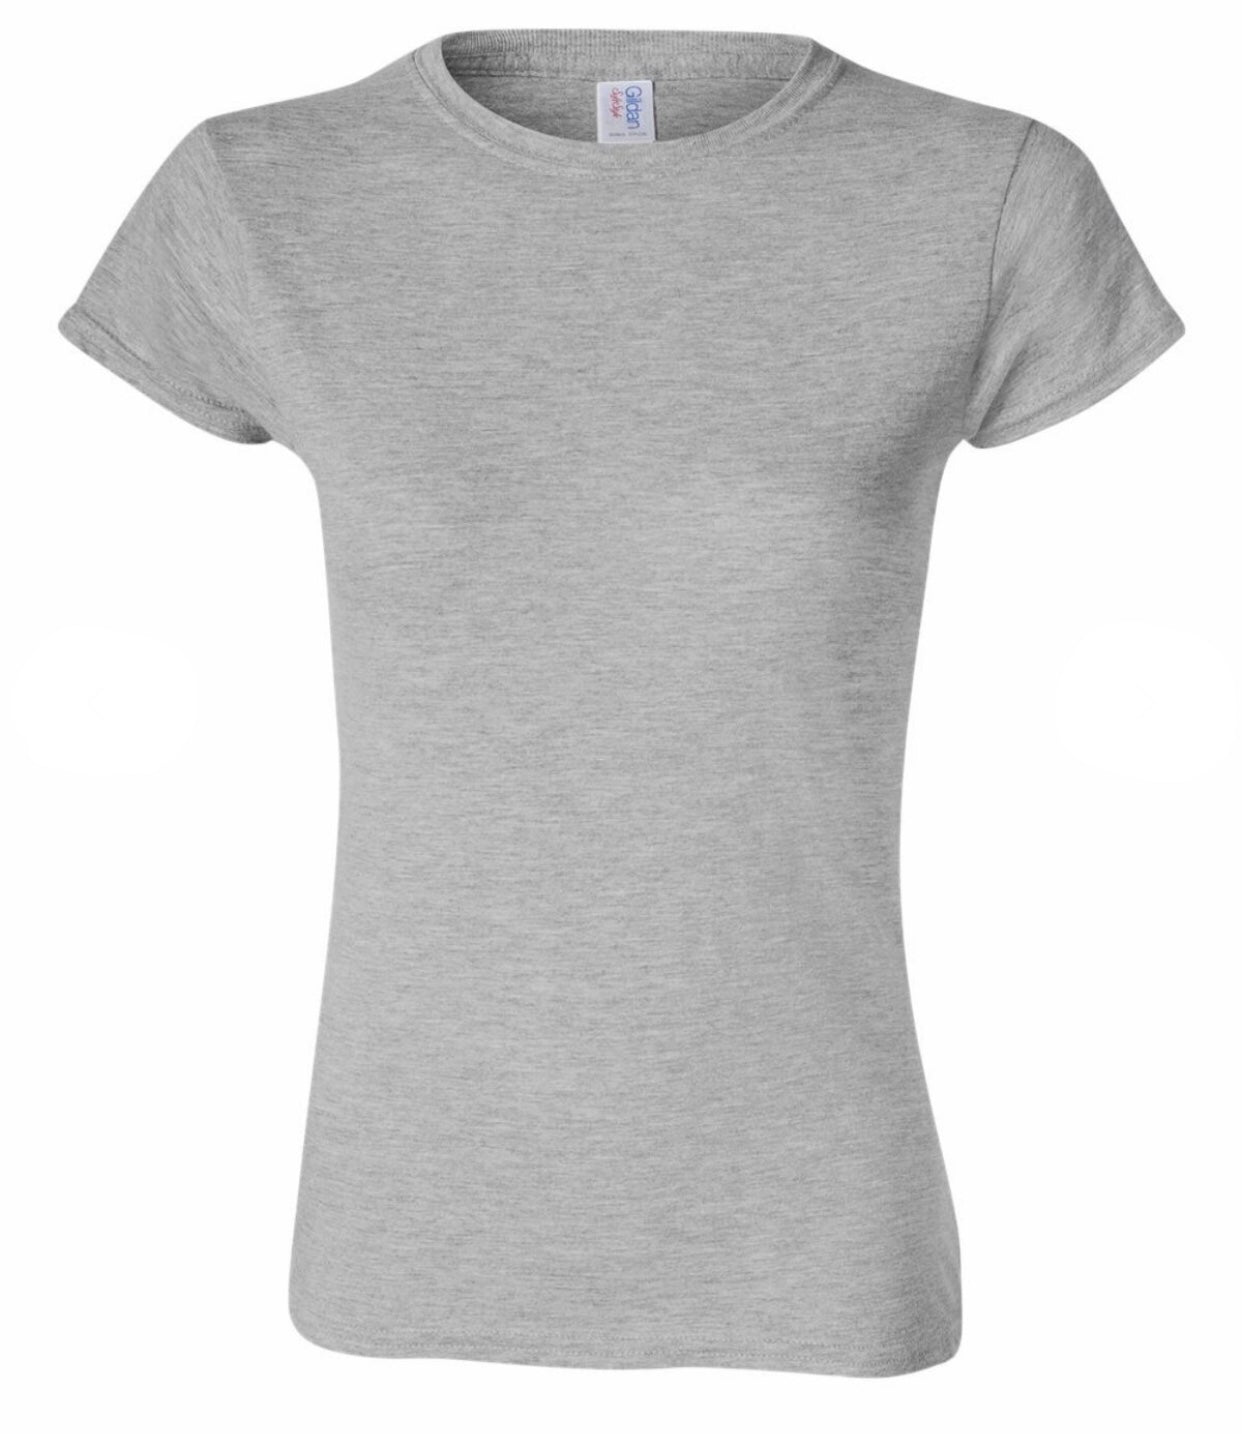 WOMEN’S High quality SOFTSTYLE® T-SHIRT